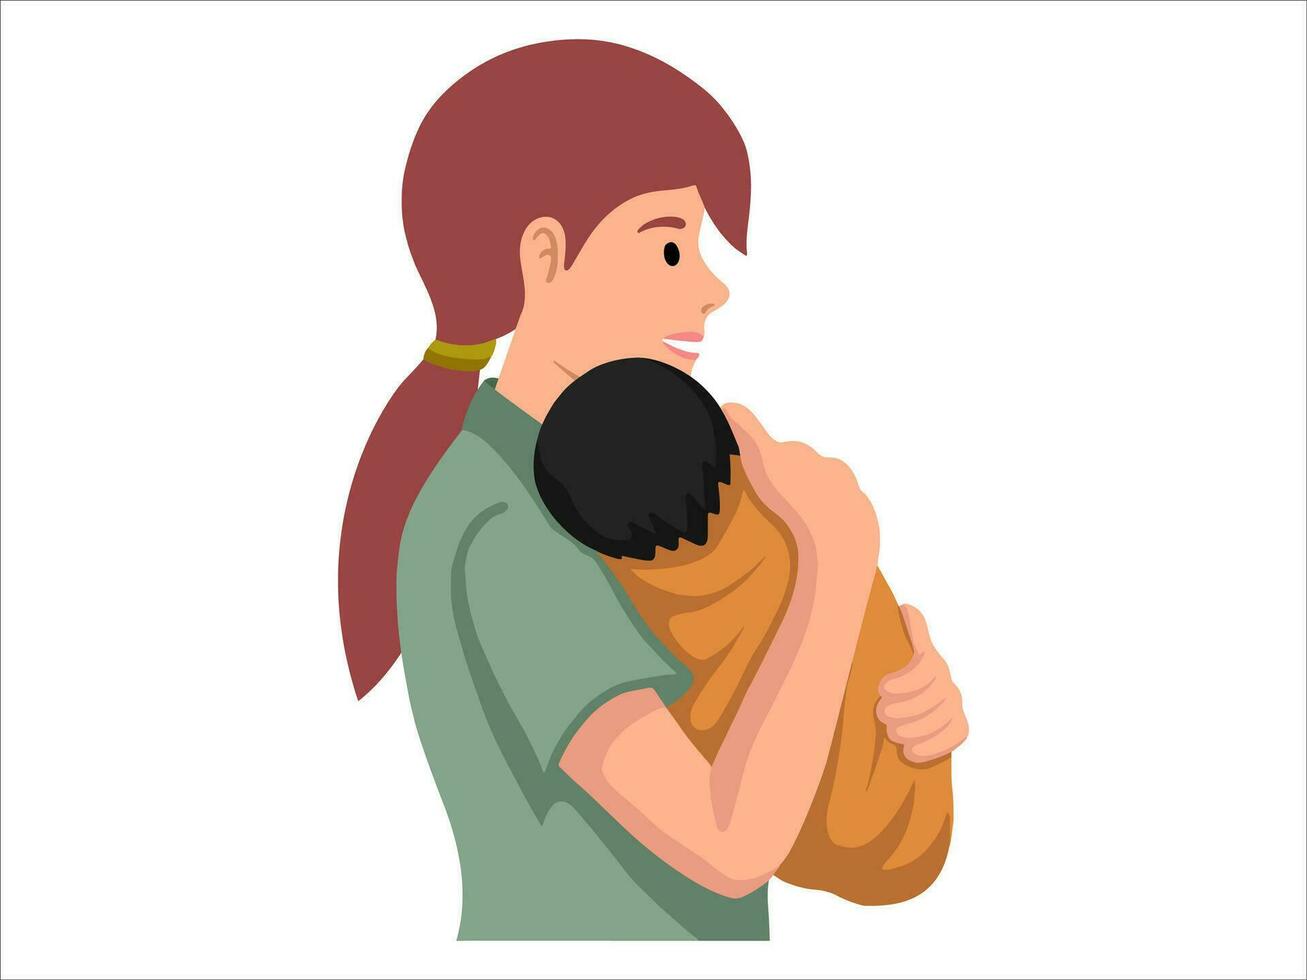 Mom holding baby or avatar icon illustration vector